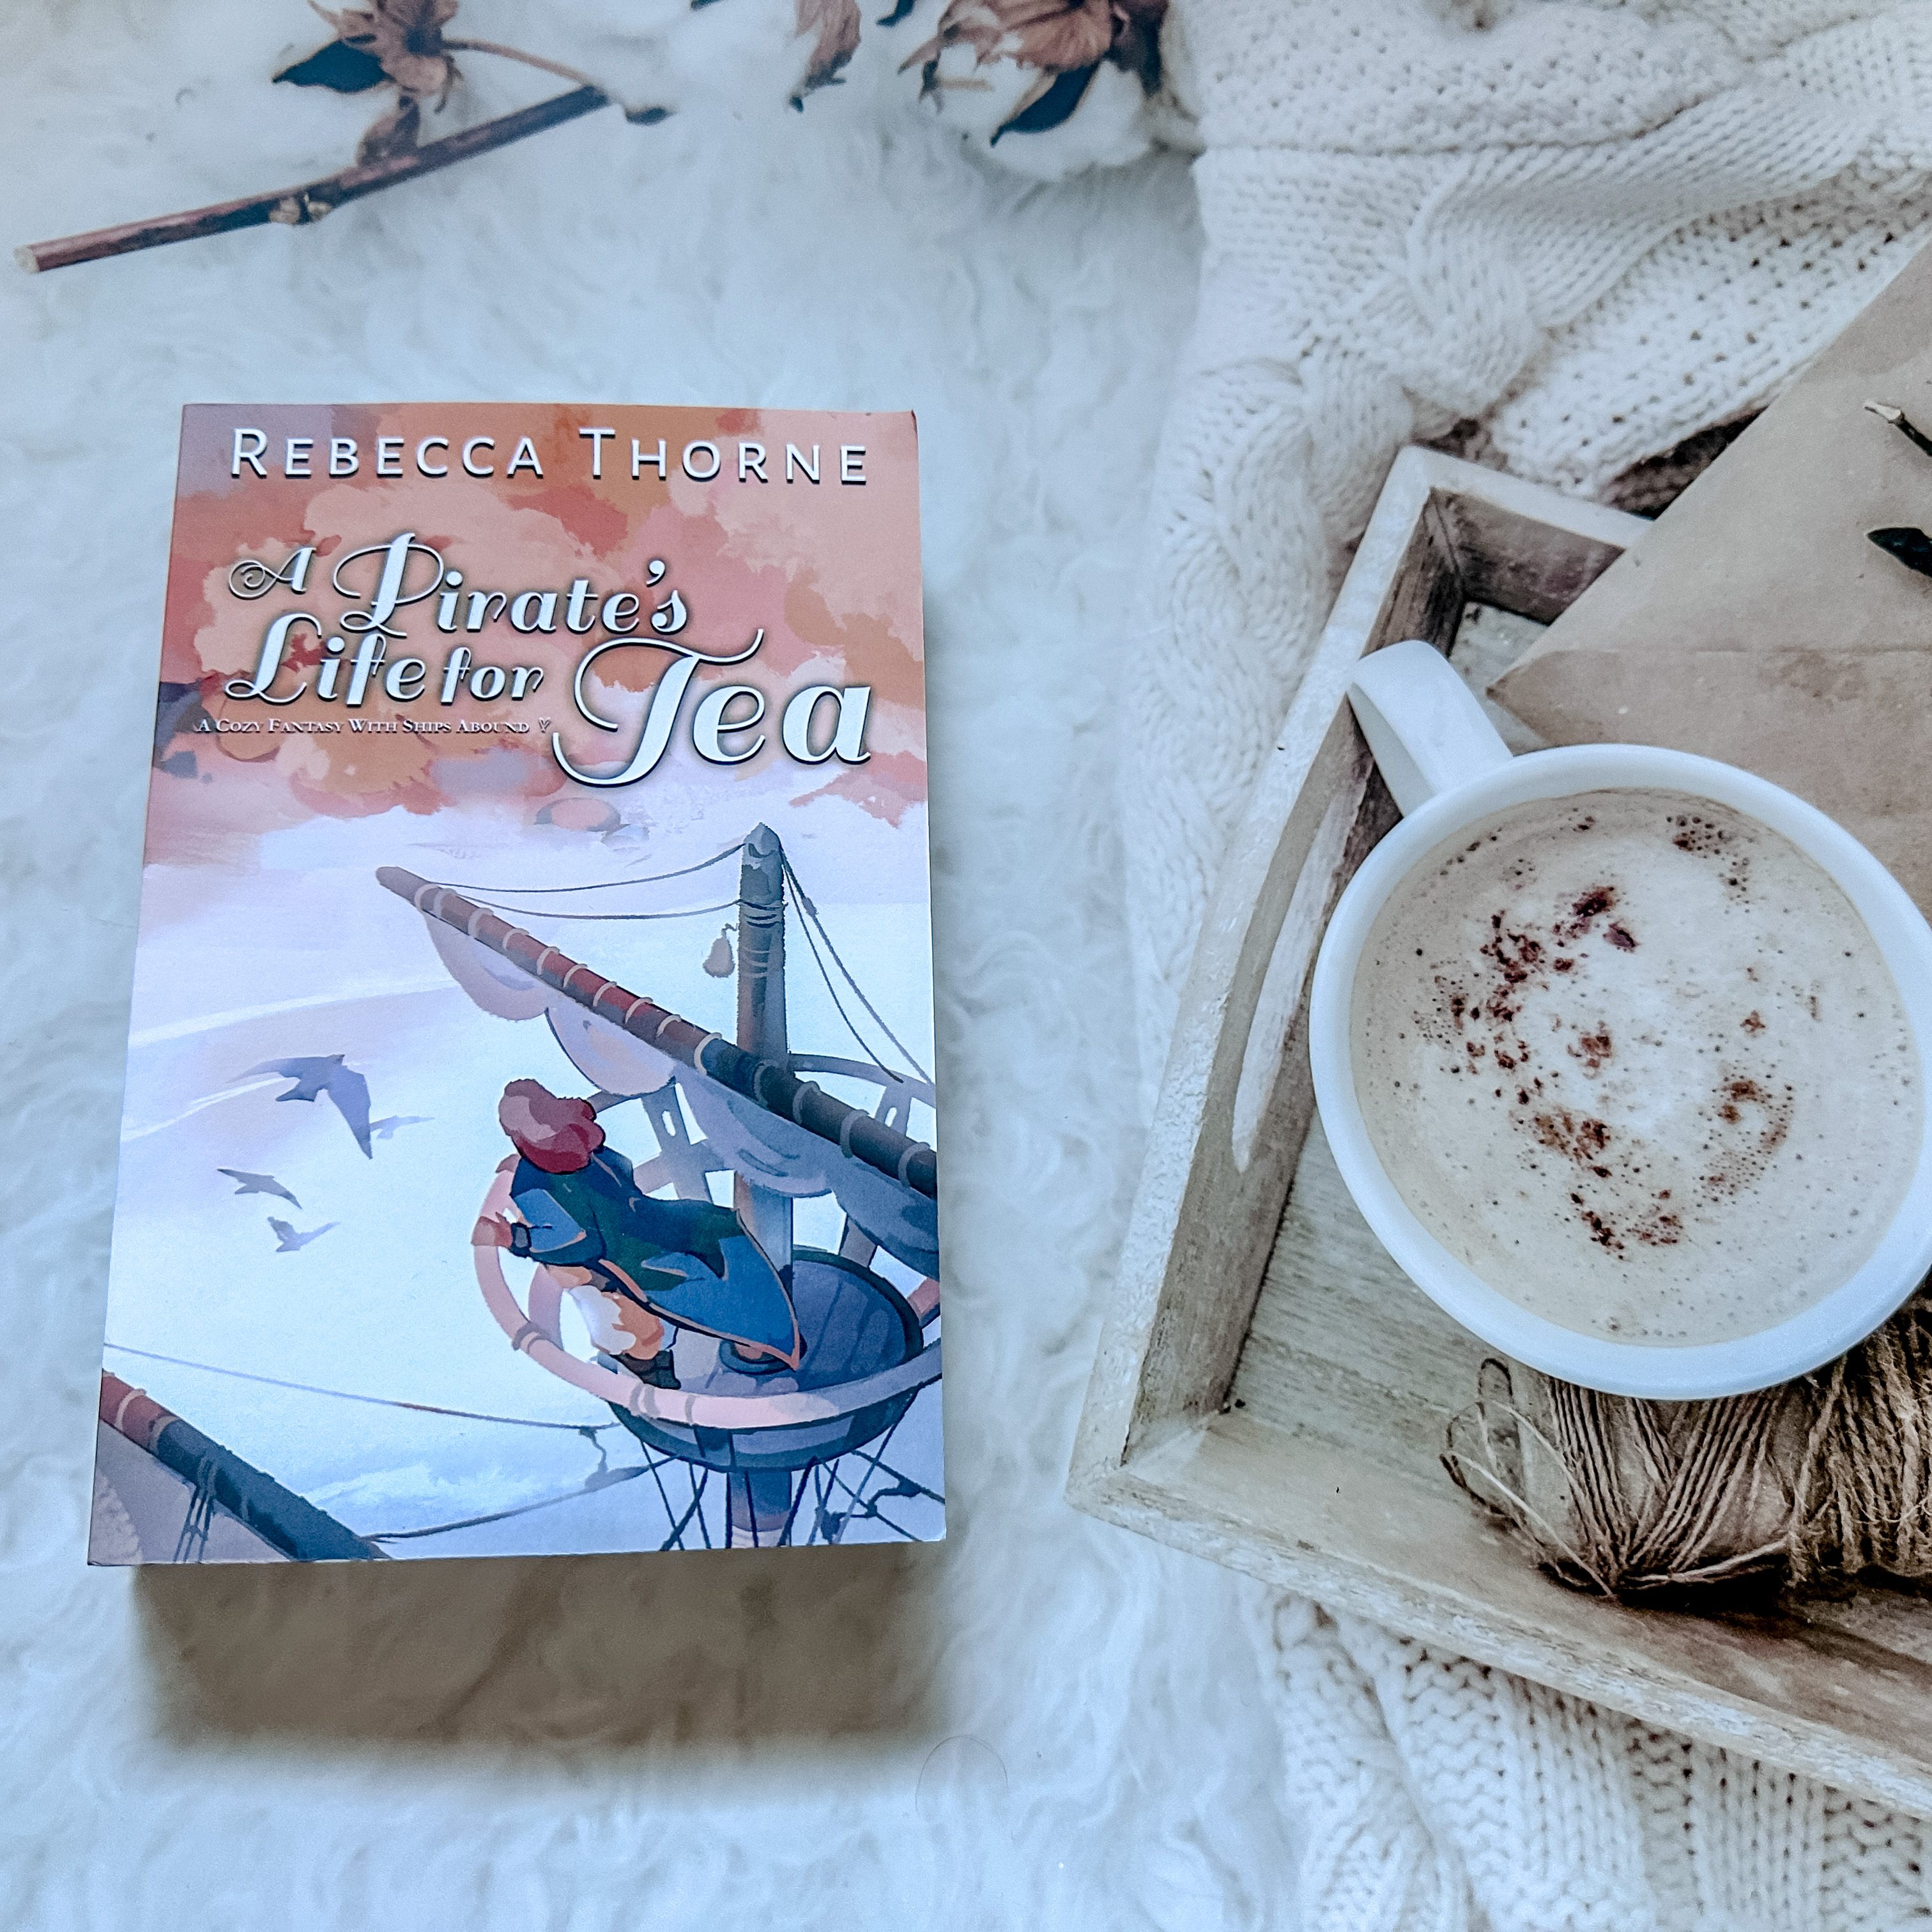 Book Review: A Pirate’s Life for Tea by Rebecca Thorne